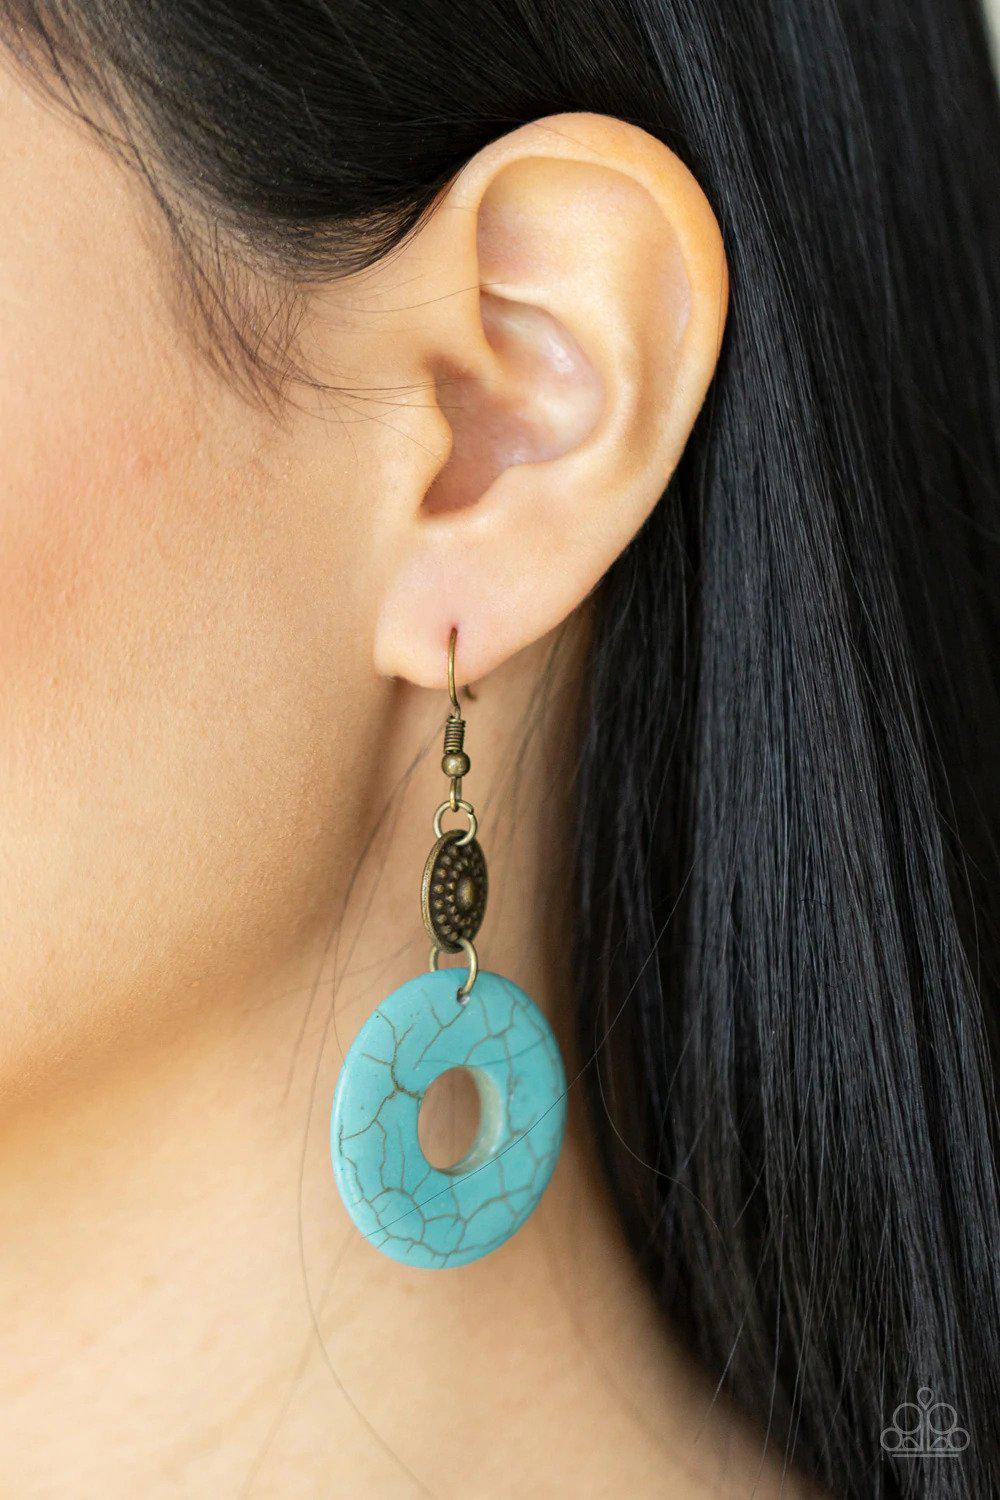 Earthy Epicenter Brass Earrings - Paparazzi Accessories- on model - CarasShop.com - $5 Jewelry by Cara Jewels